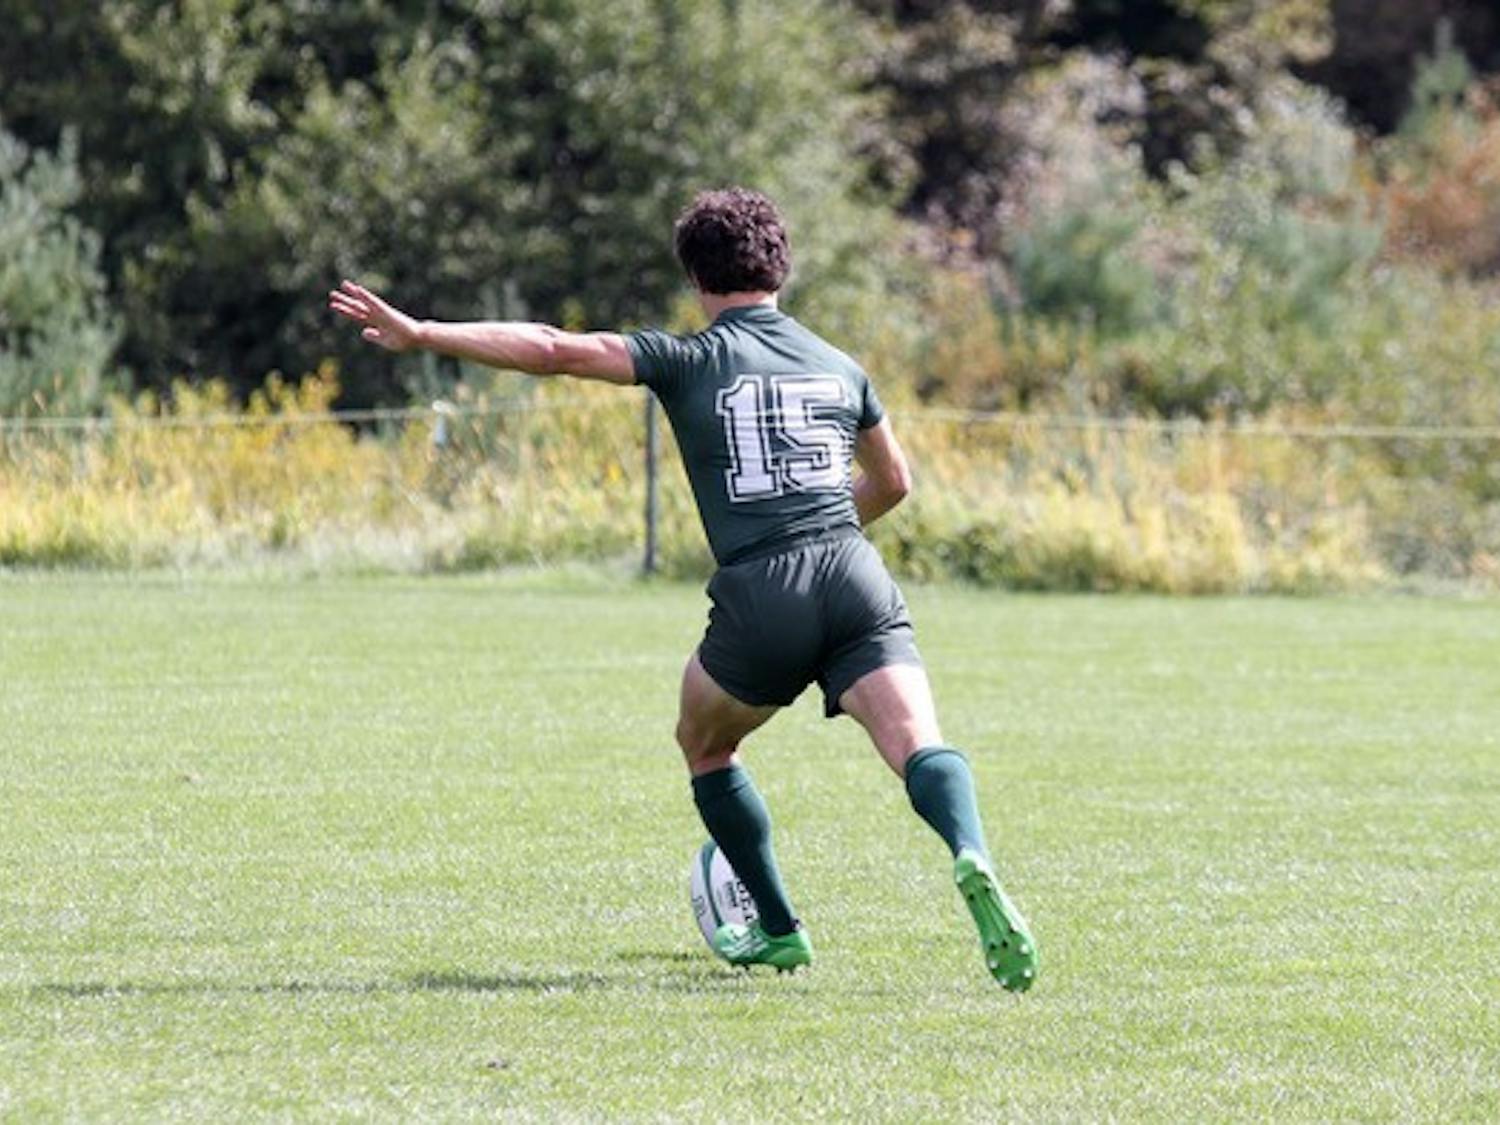 Led by Madison Hughes '15, the men's rugby team cruised to a tournament victory this weekend.